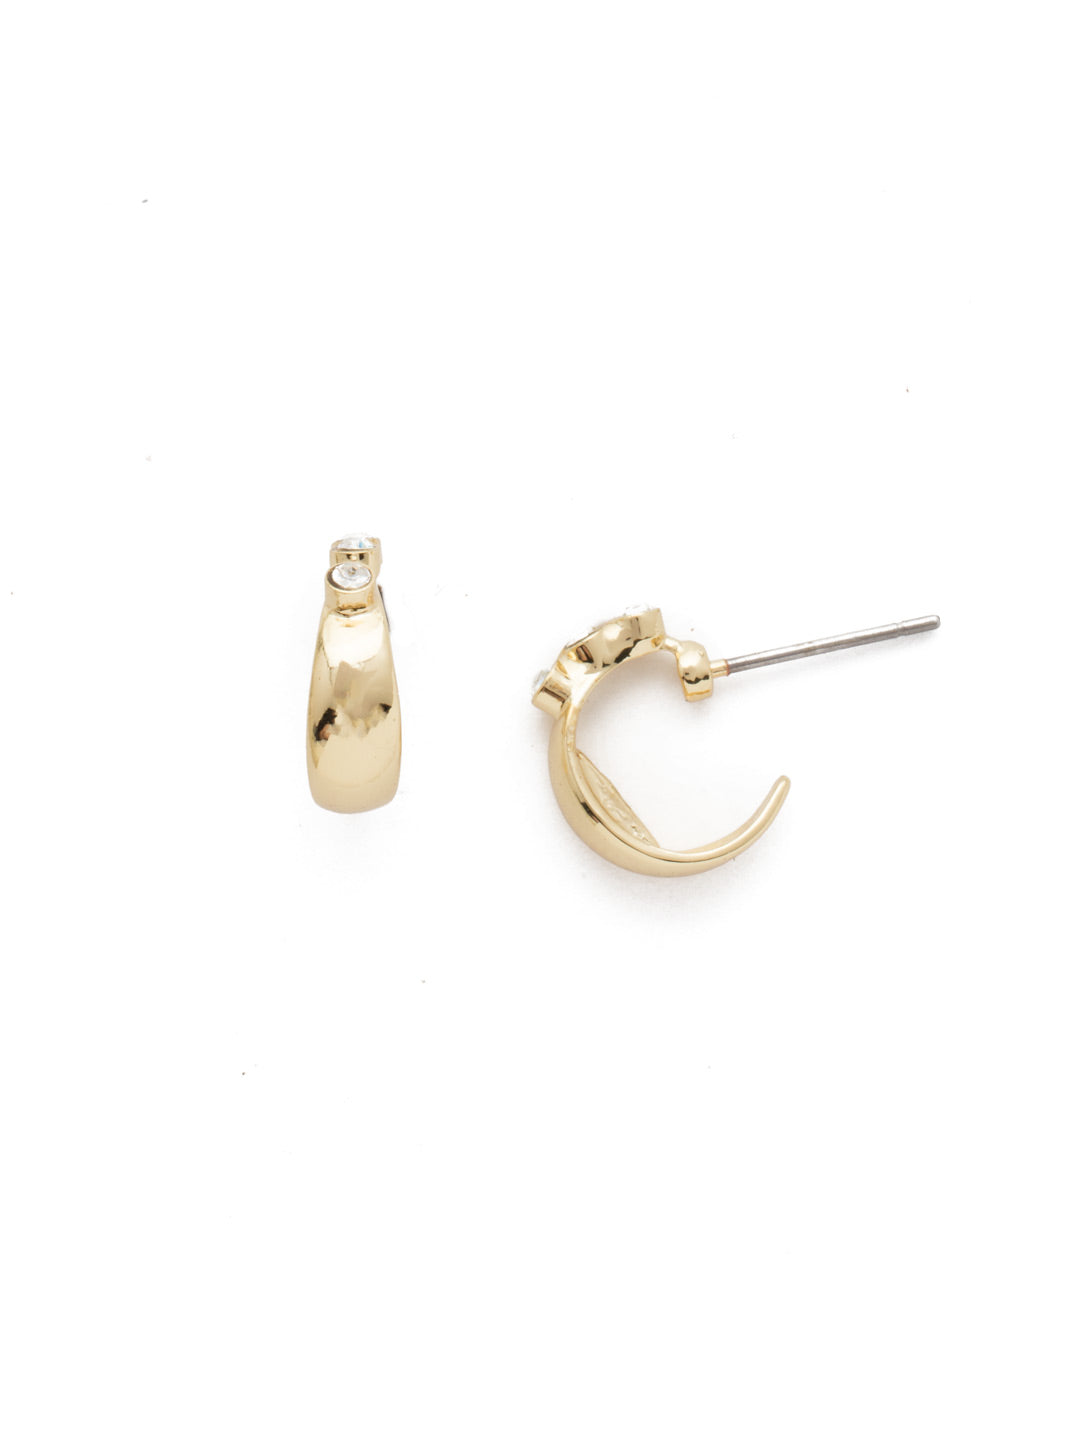 Winifred Stud Earrings - EEJ5BGCRY - A classic Sorrelli style to make a statement or wear everyday. From Sorrelli's Crystal collection in our Bright Gold-tone finish.